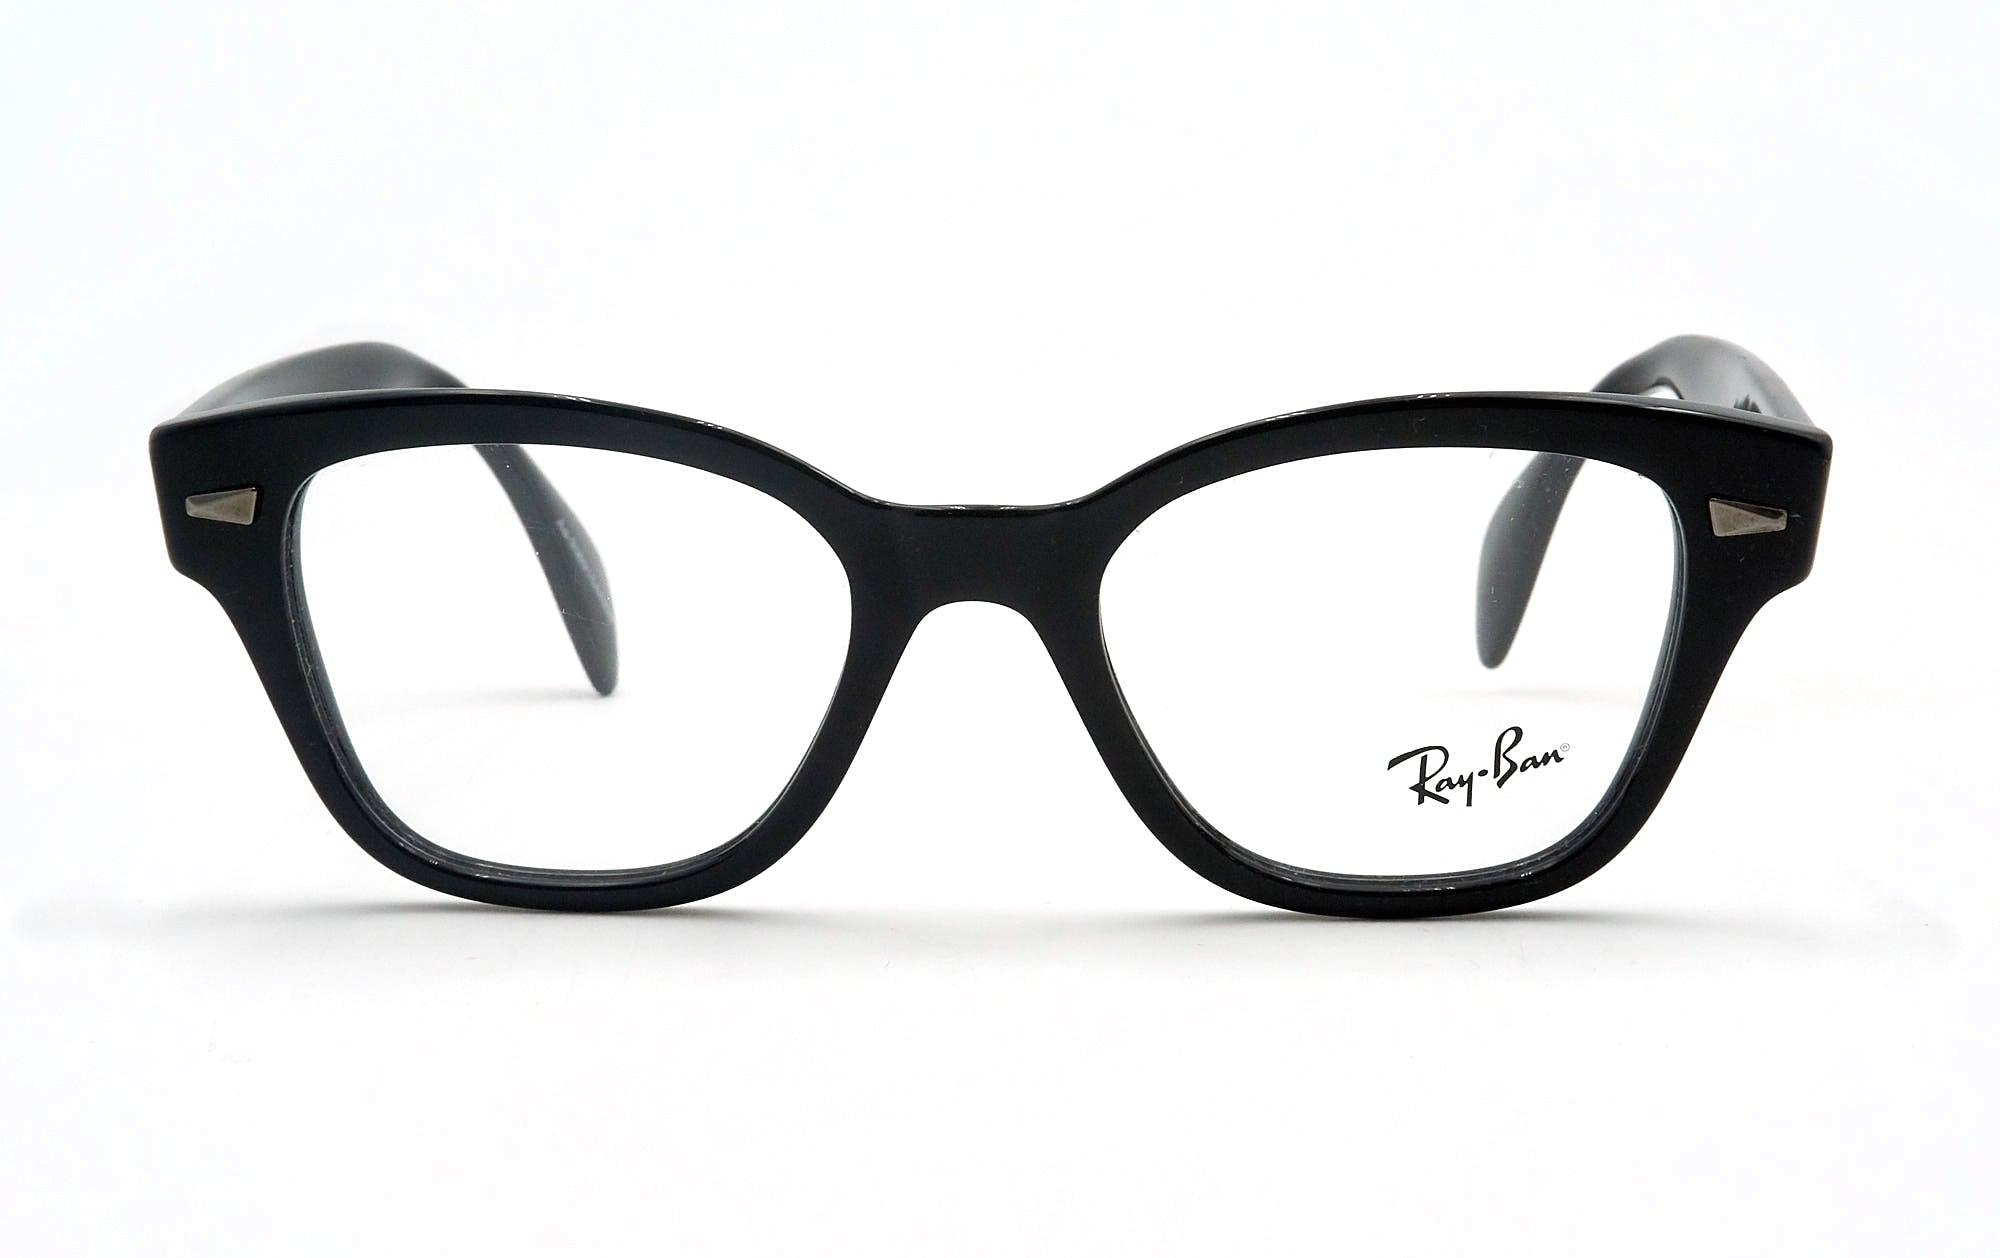 RAY-BAN 0880 2000 - Opticas Lookout